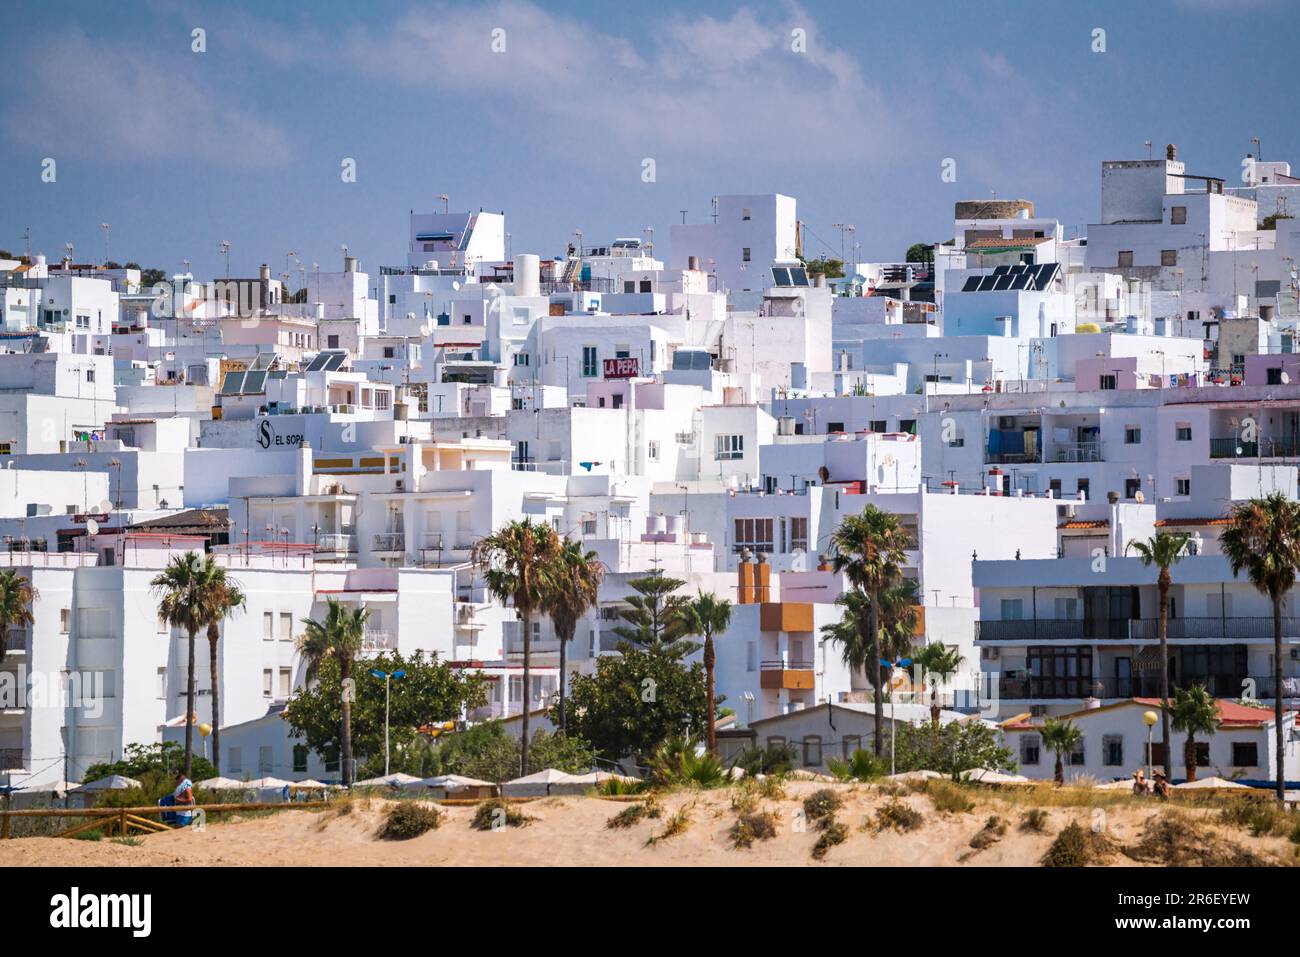 View of Conil de la Frontera, Andalucia, Spain. Stock Photo by  ©LisaStrachan 37908255